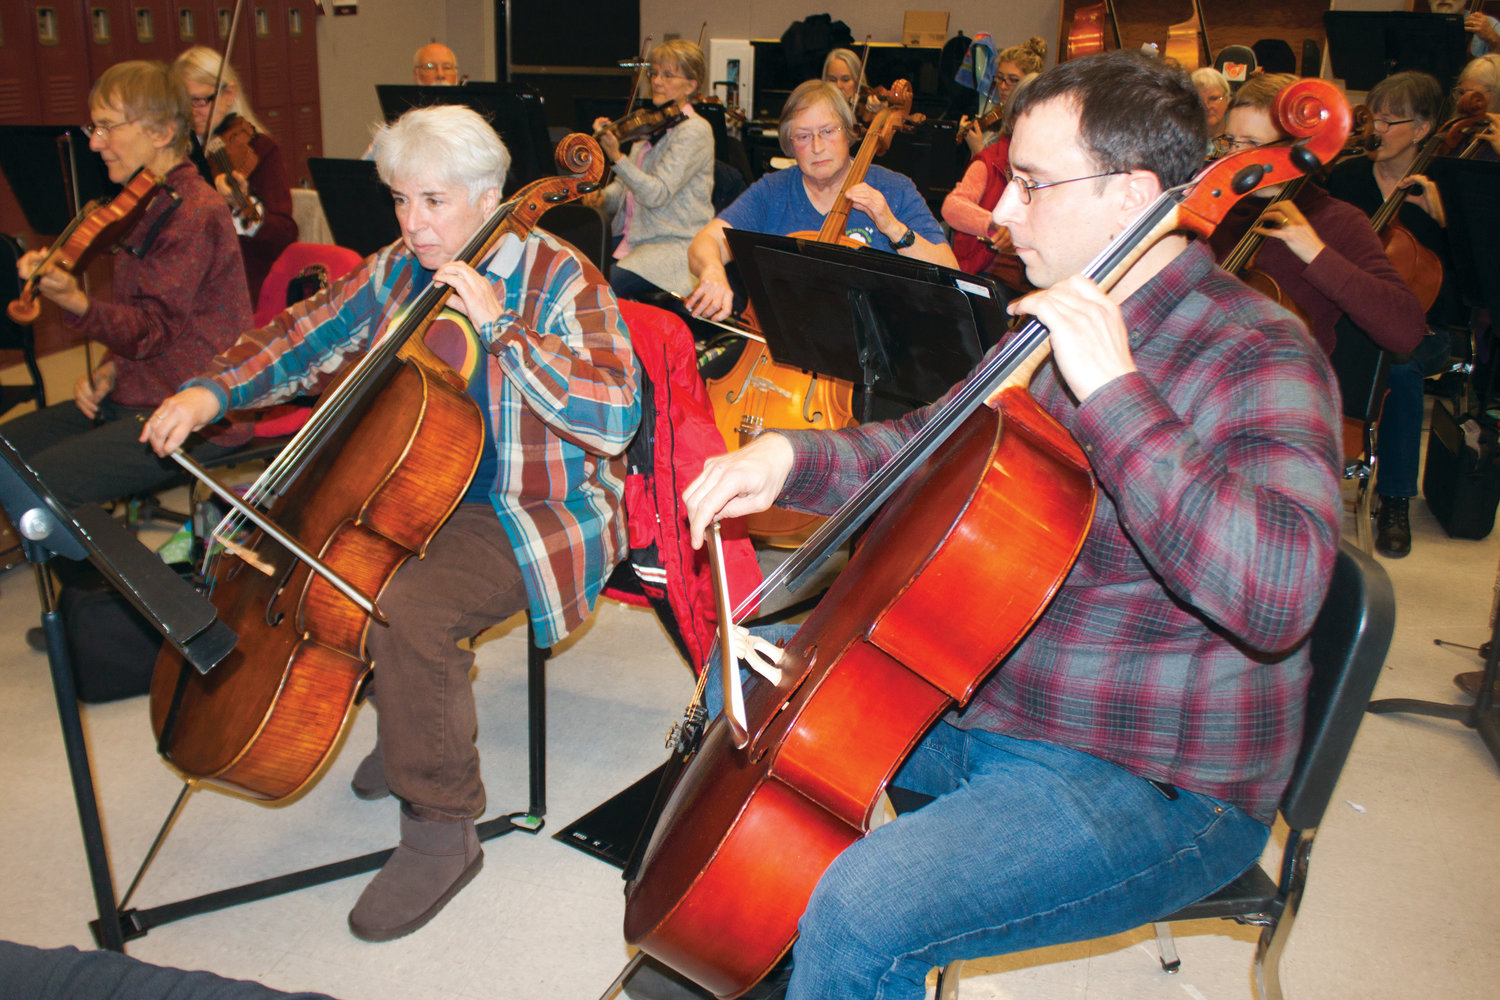 Members of the Port Townsend Symphony Orchestra rehearse in preparation for their Dec. 7 “Grand Finale” concert at 7:30 p.m. in the Chimacum Junior/Senior High School auditorium.